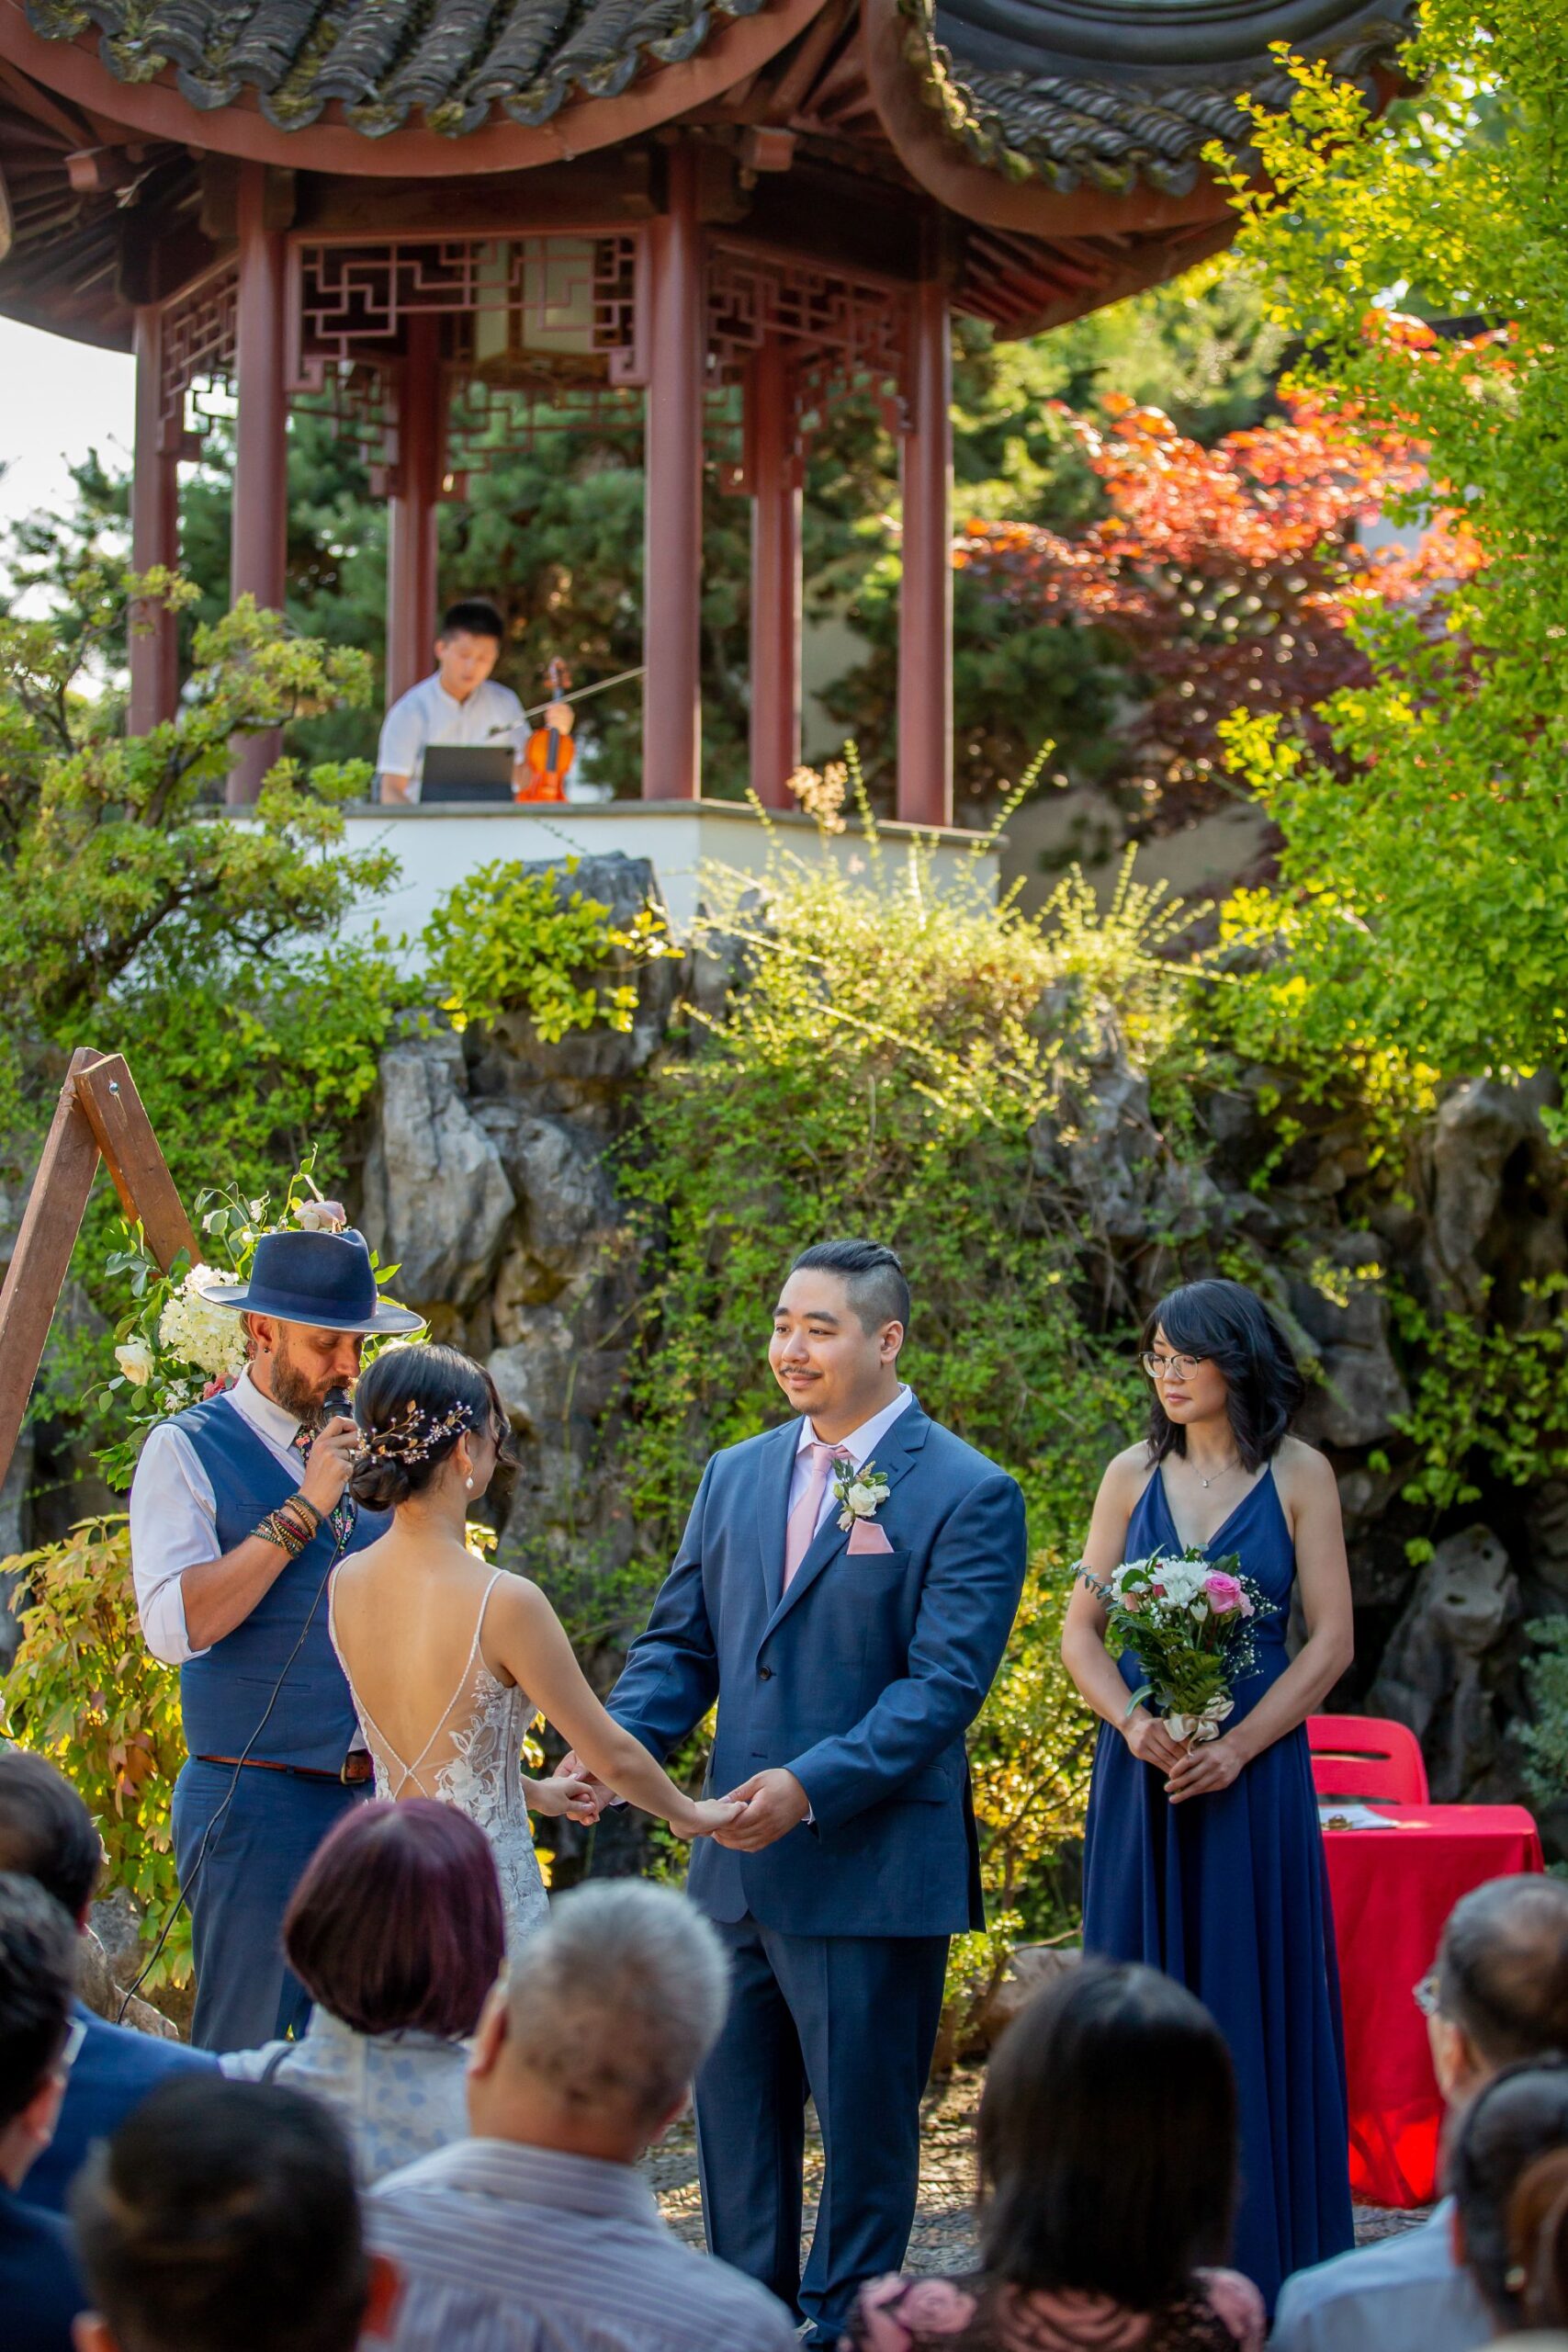 Young Hip & Married ceremony at Dr. Sun Yat-Sen Gardens